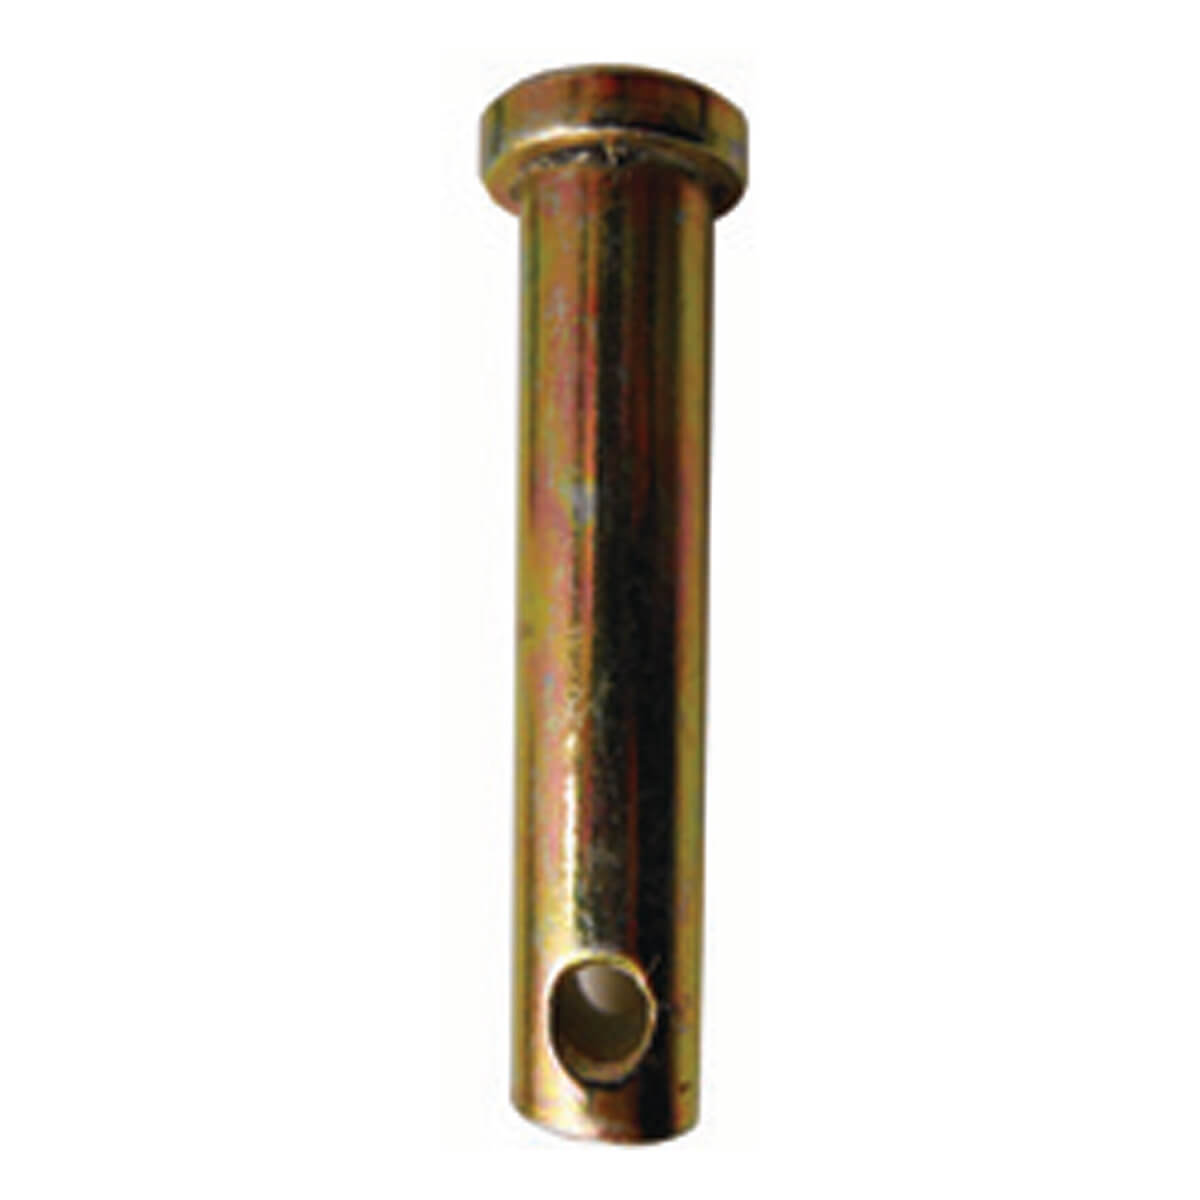 Clevis Pin - 7/16" x 1-1/2"